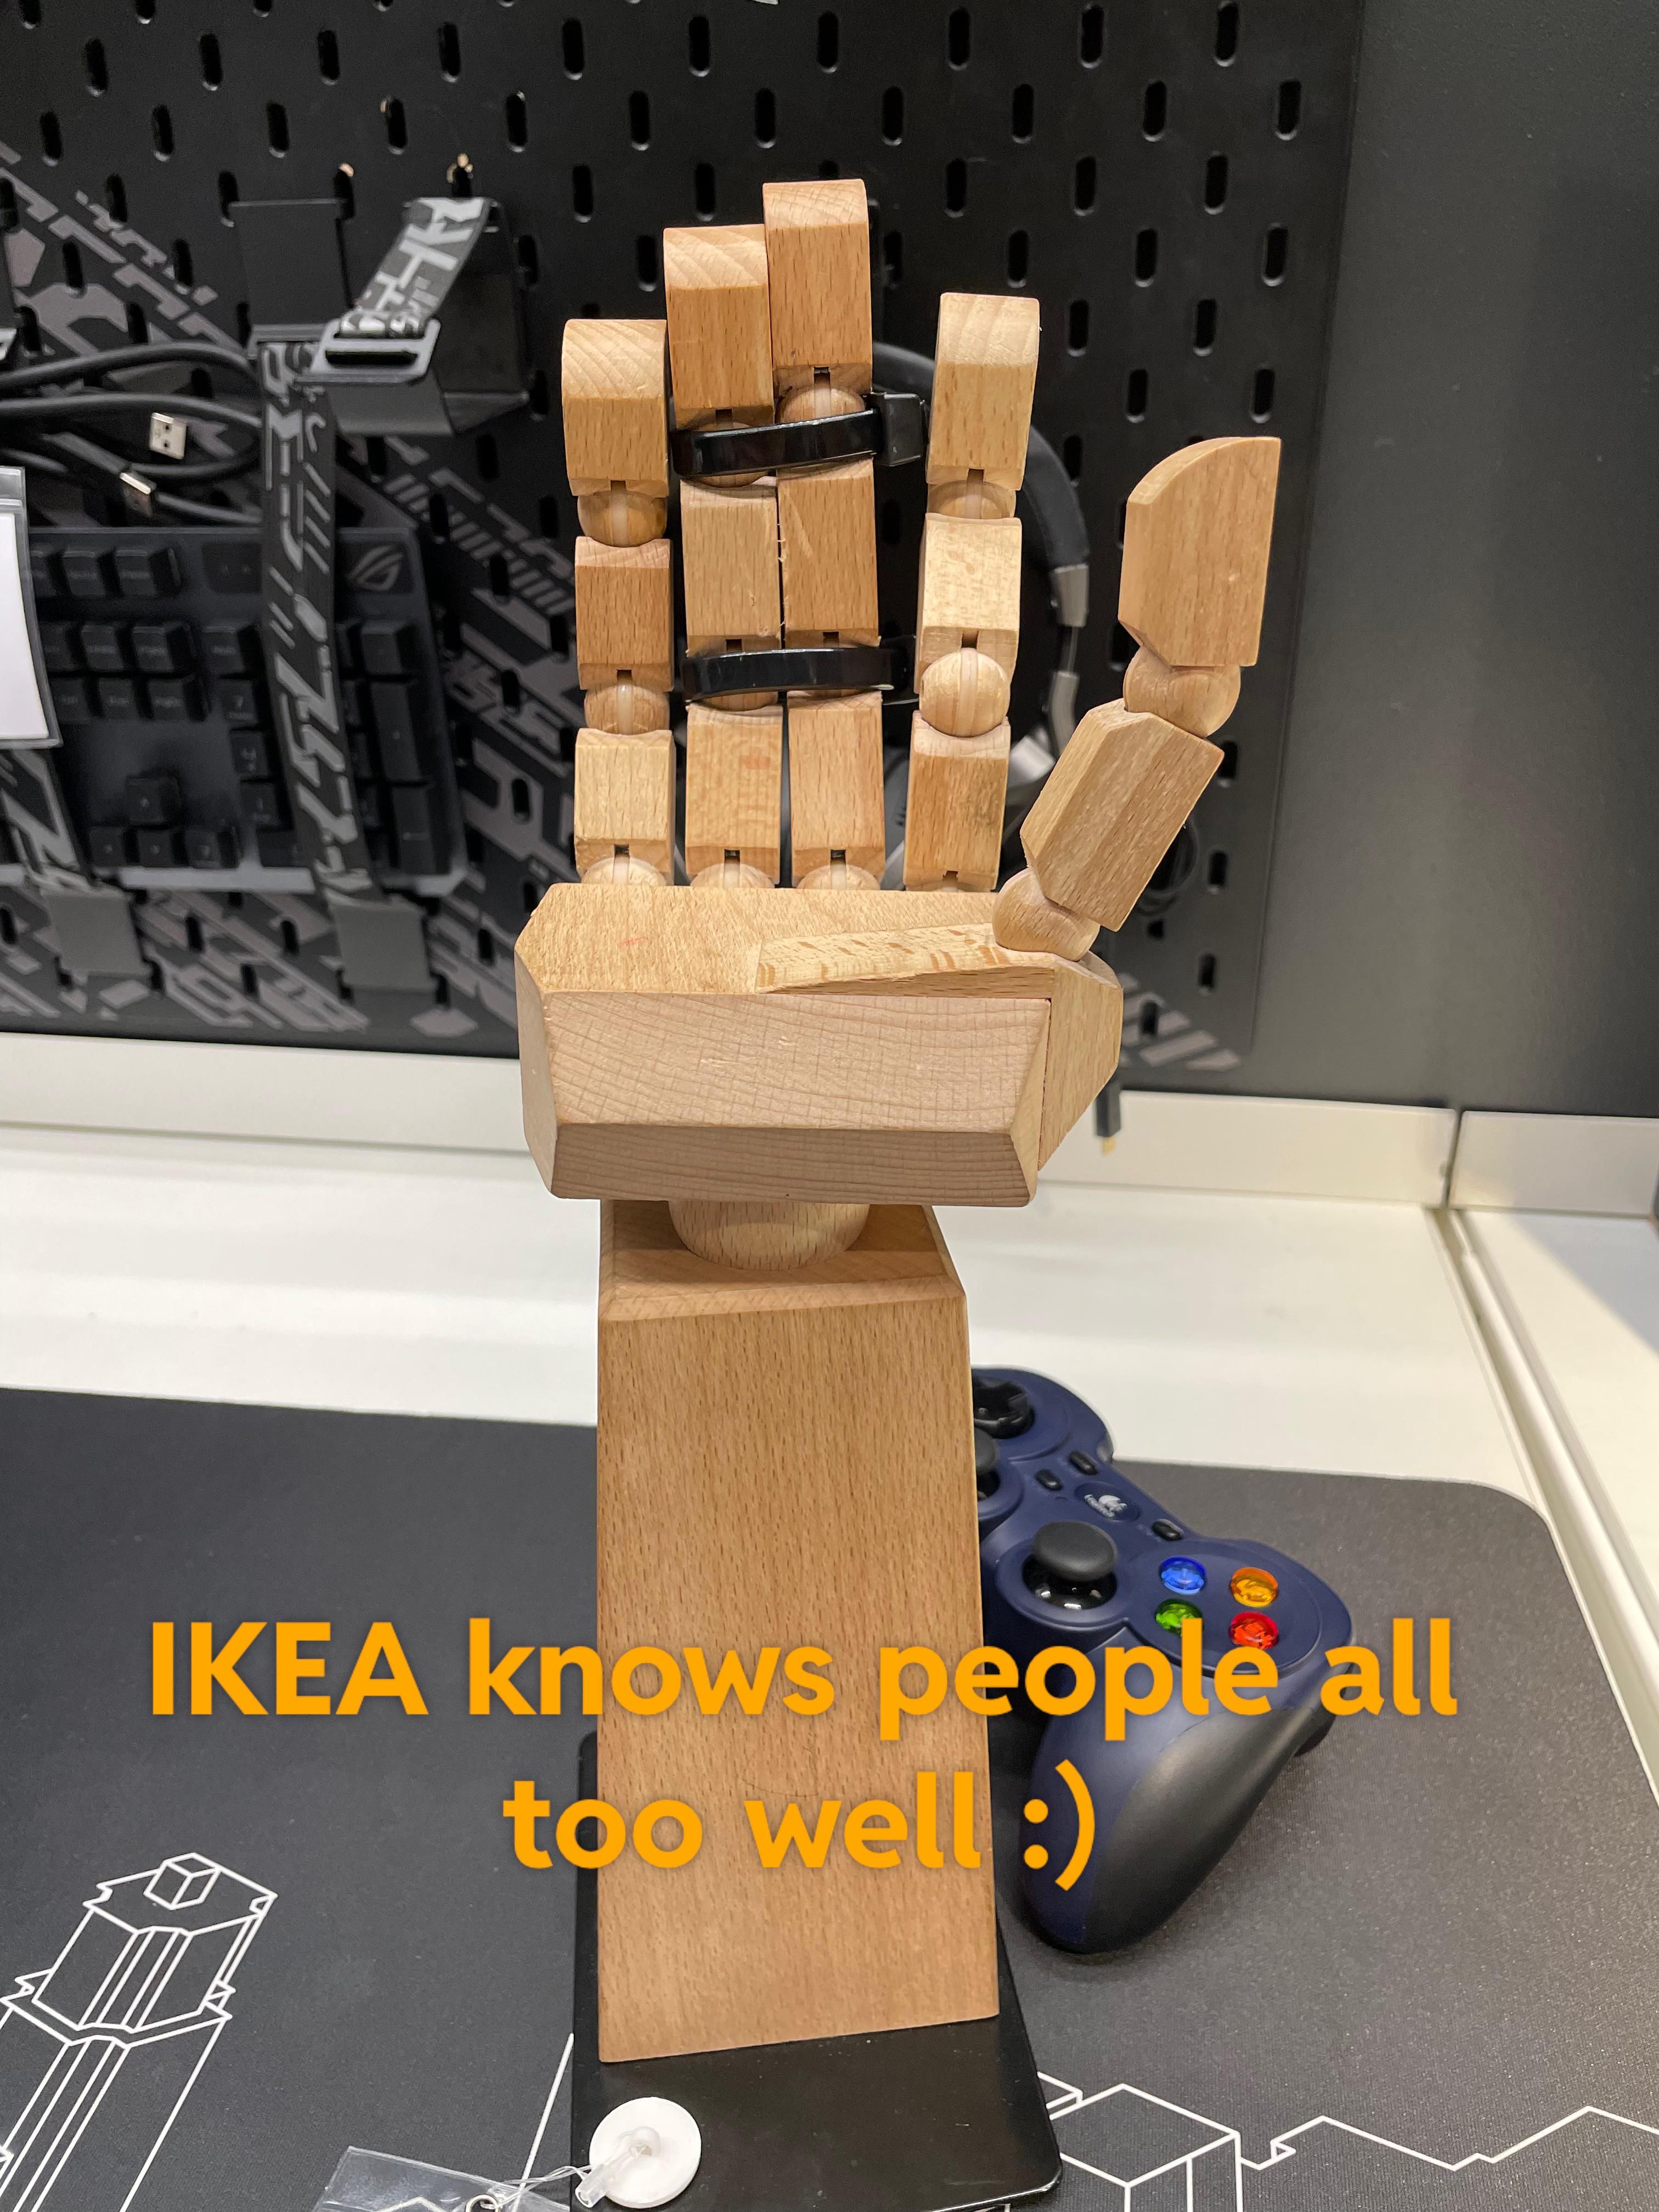 Recent modification at the local IKEA store.